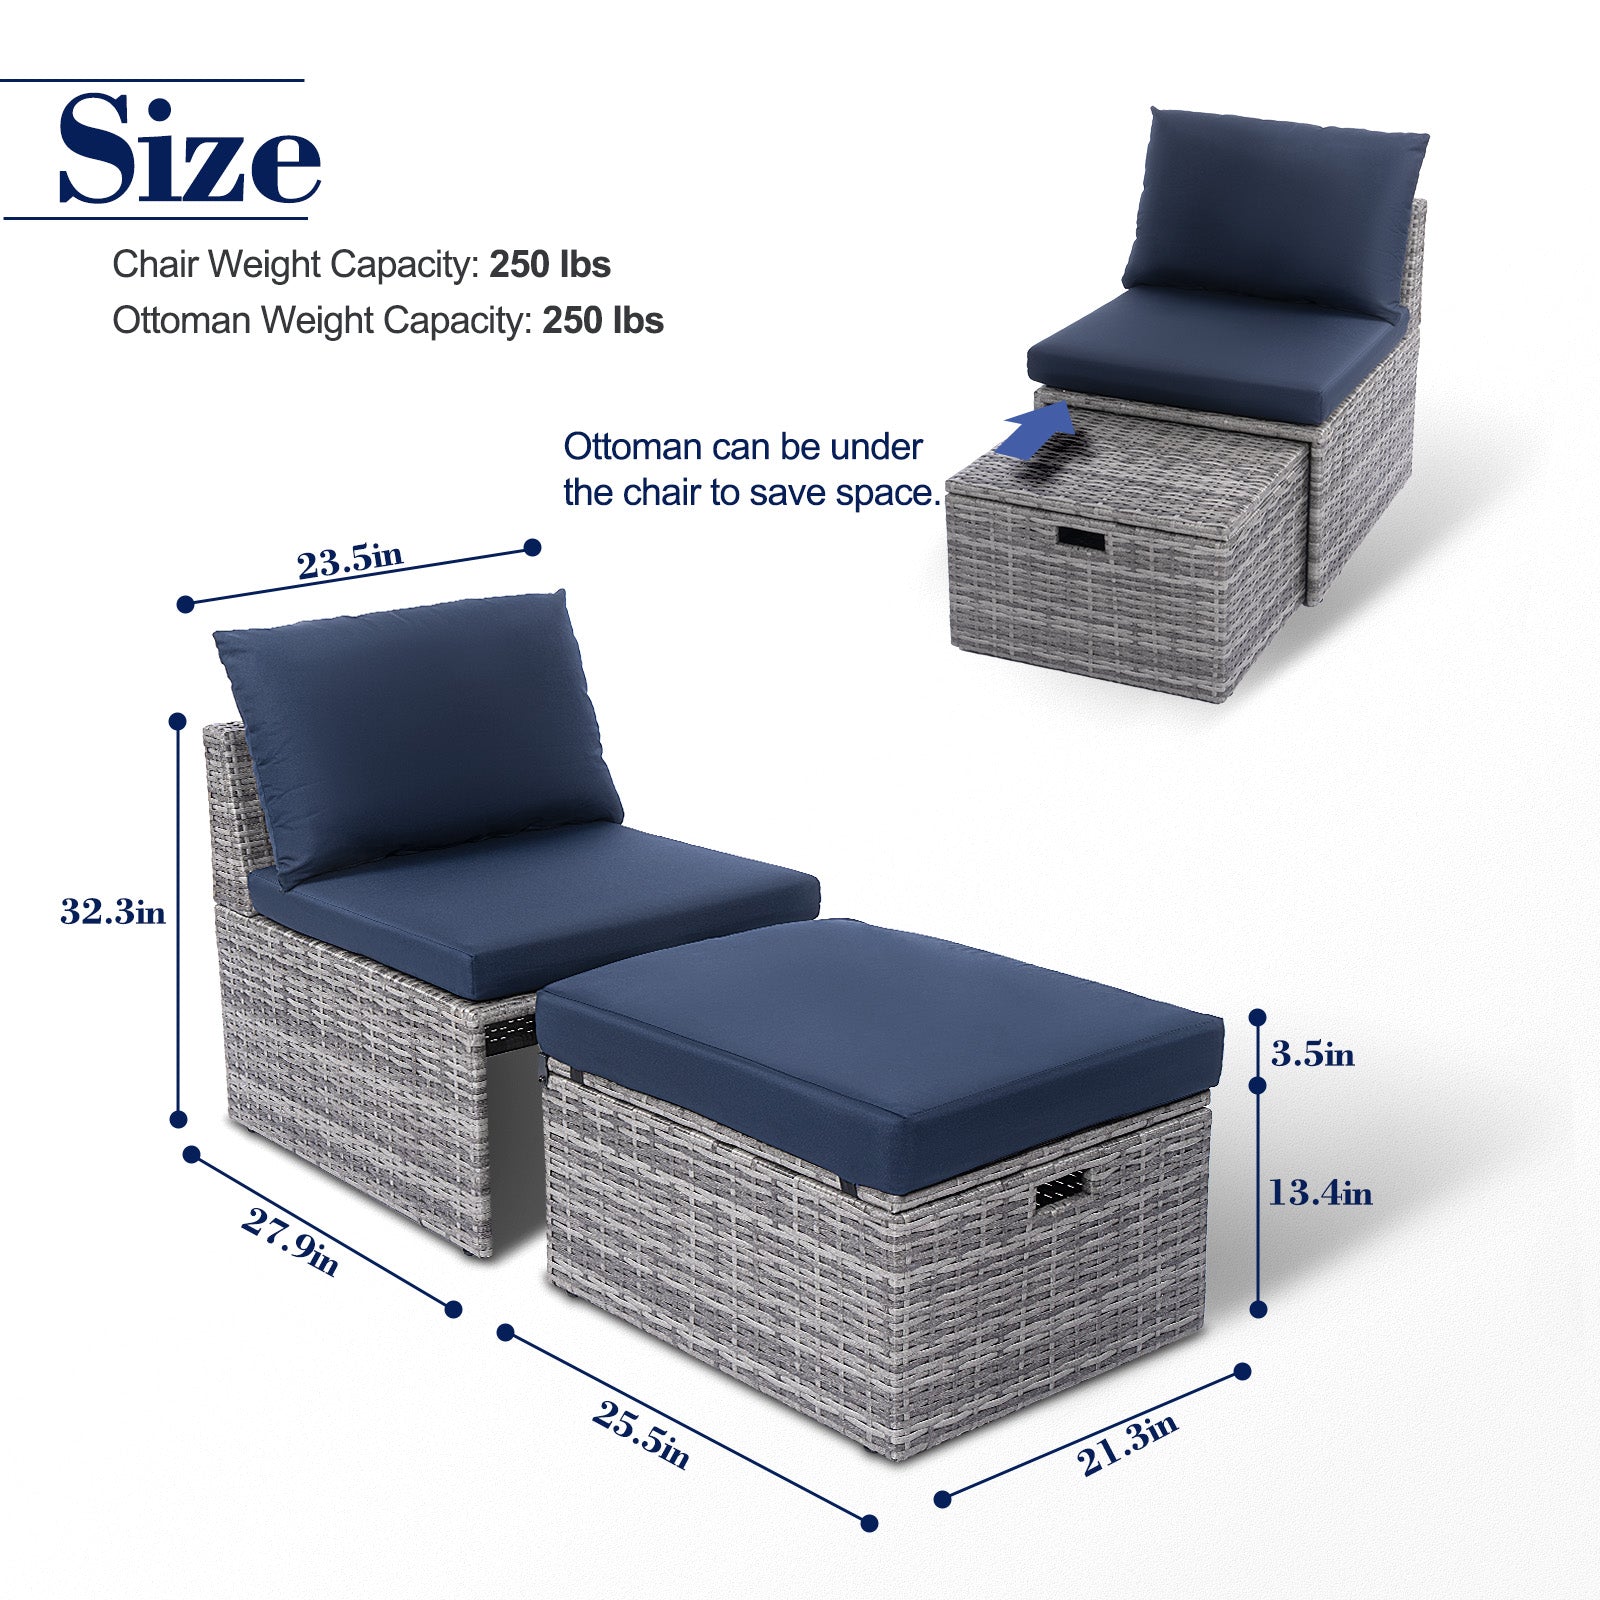 2 Pc. Outdoor Wicker Conversation Set with Storage and Ottoman